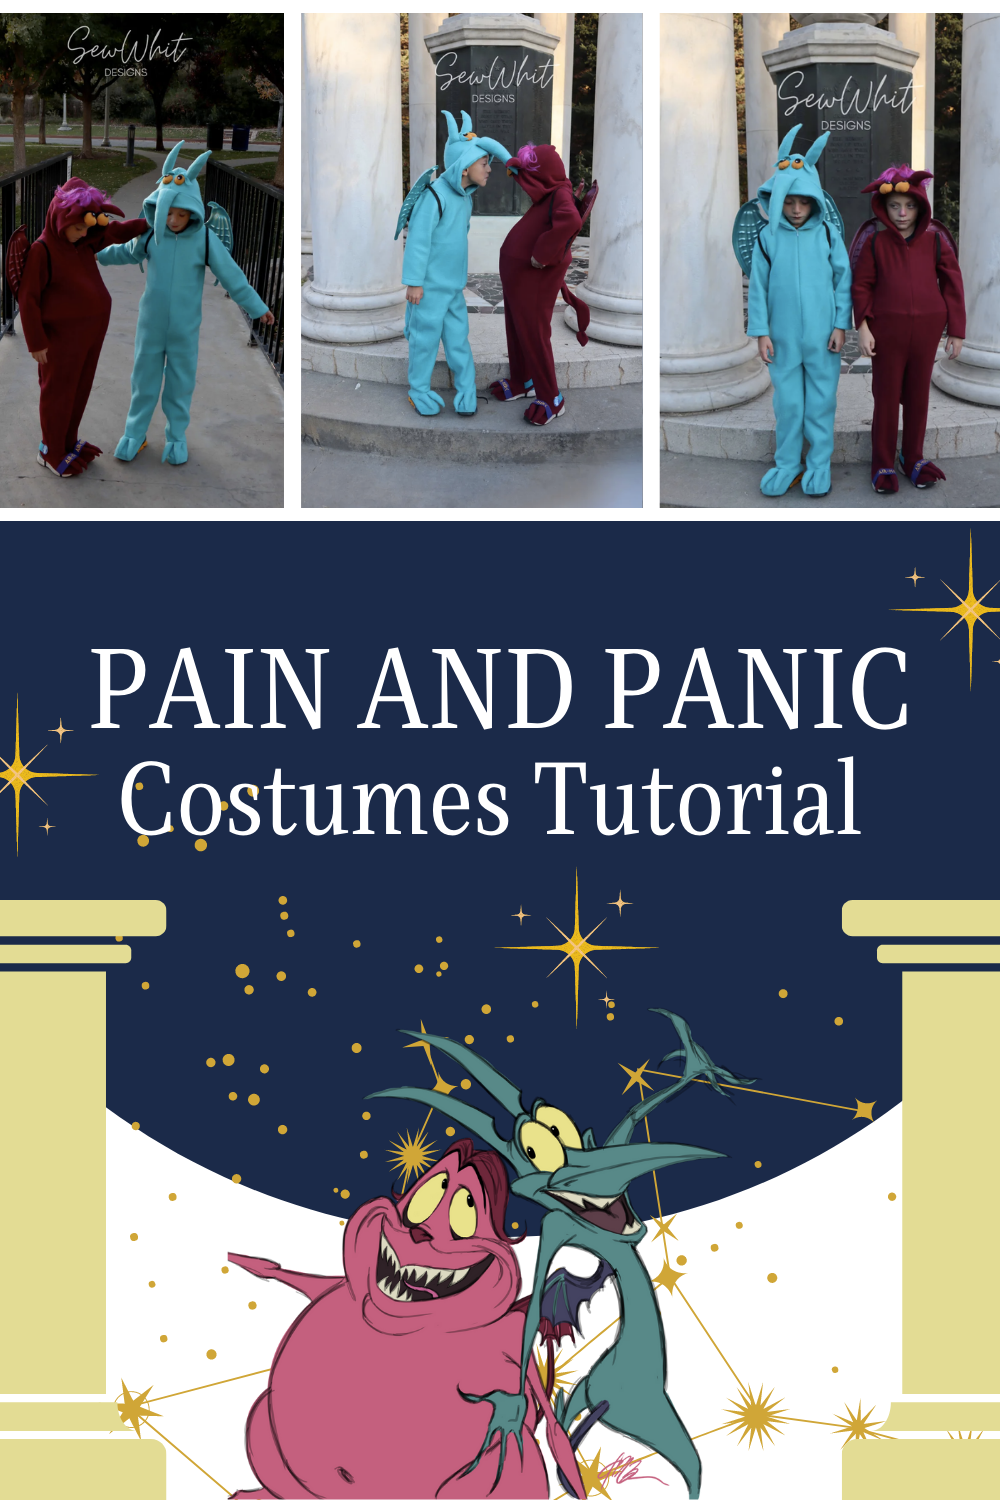 Pain And Panic Costumes Tutorial (from Hercules)